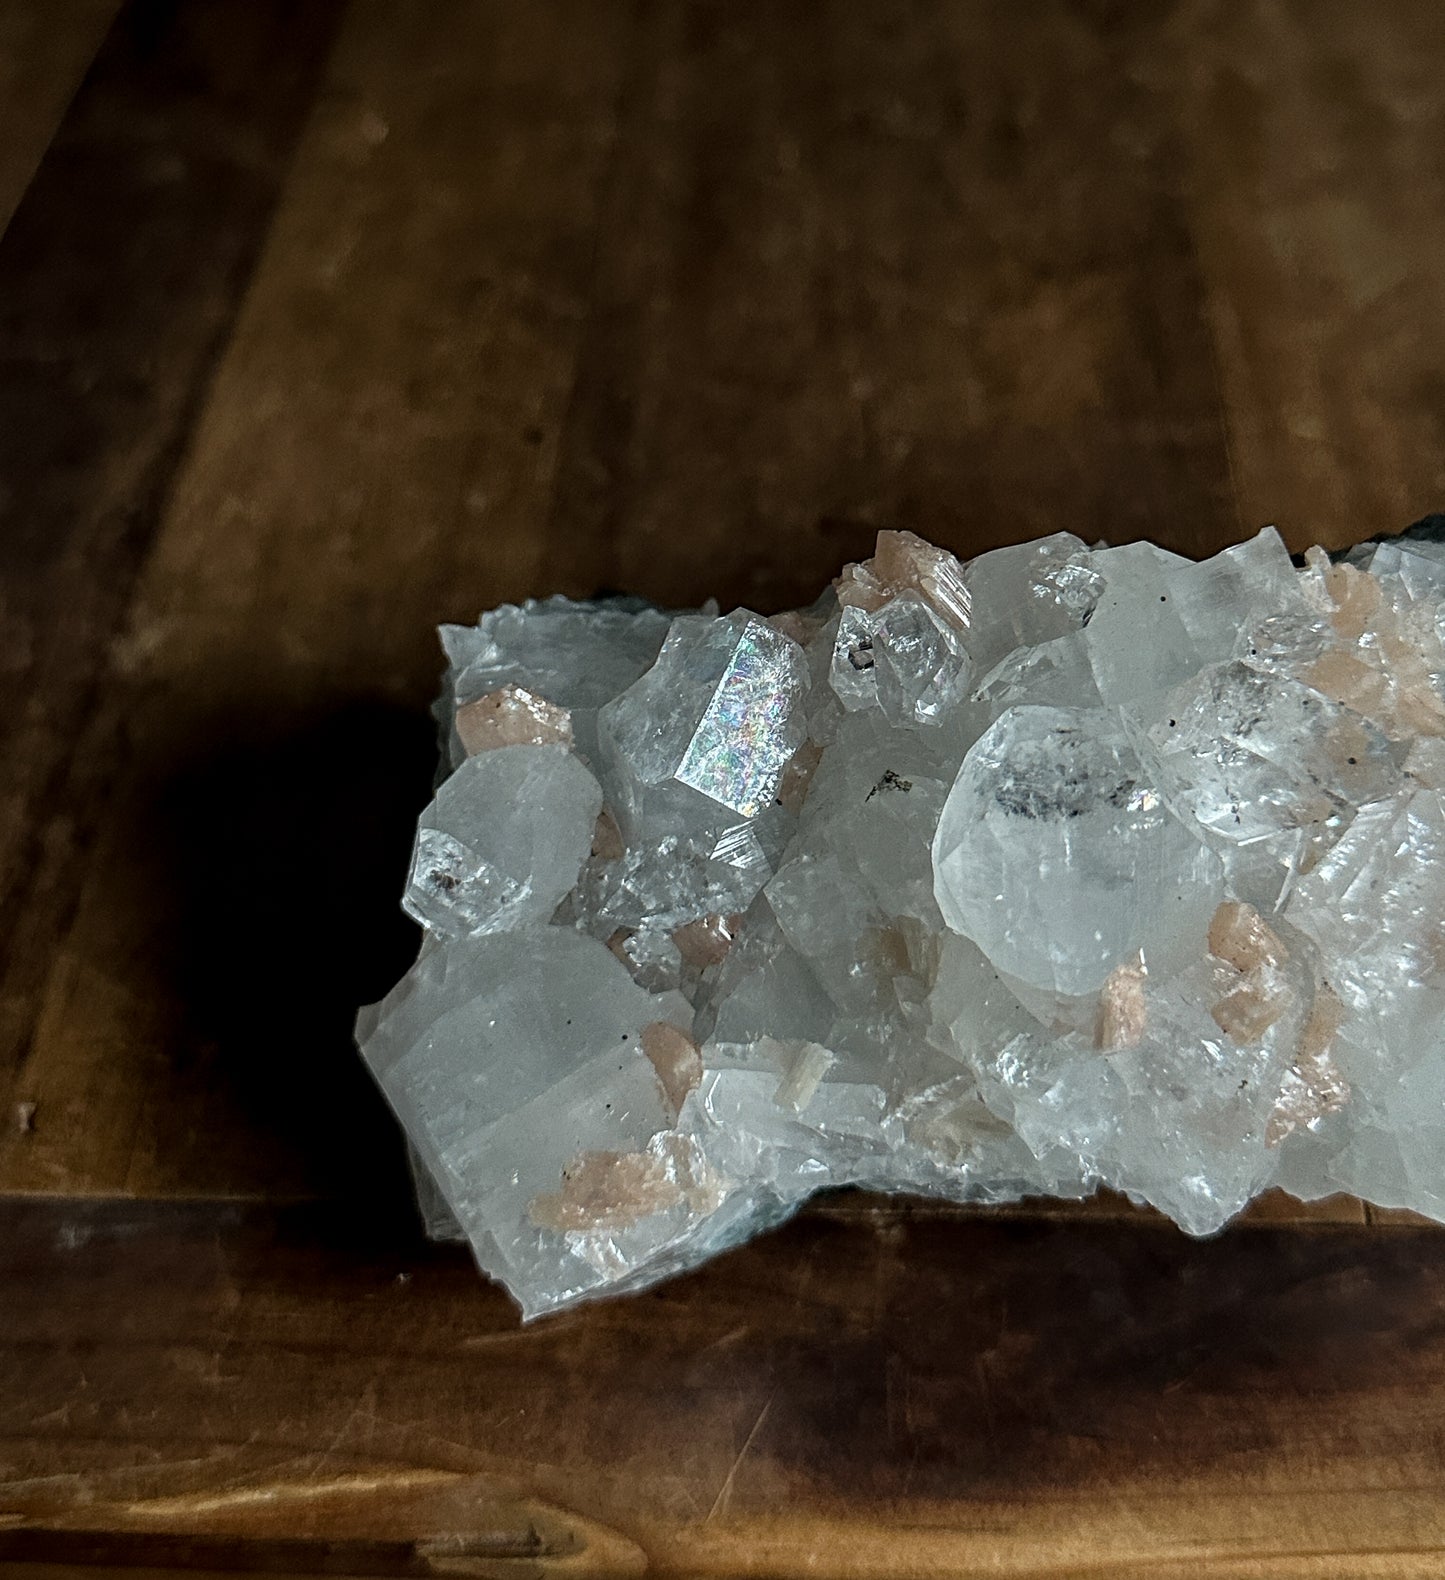 A stunning mineral specimen featuring Apophyllite crystals intertwined with delicate Pink Stilbite formations, creating a captivating contrast of textures and hues. Ideal for both enhancing home decor and delighting as a unique gift